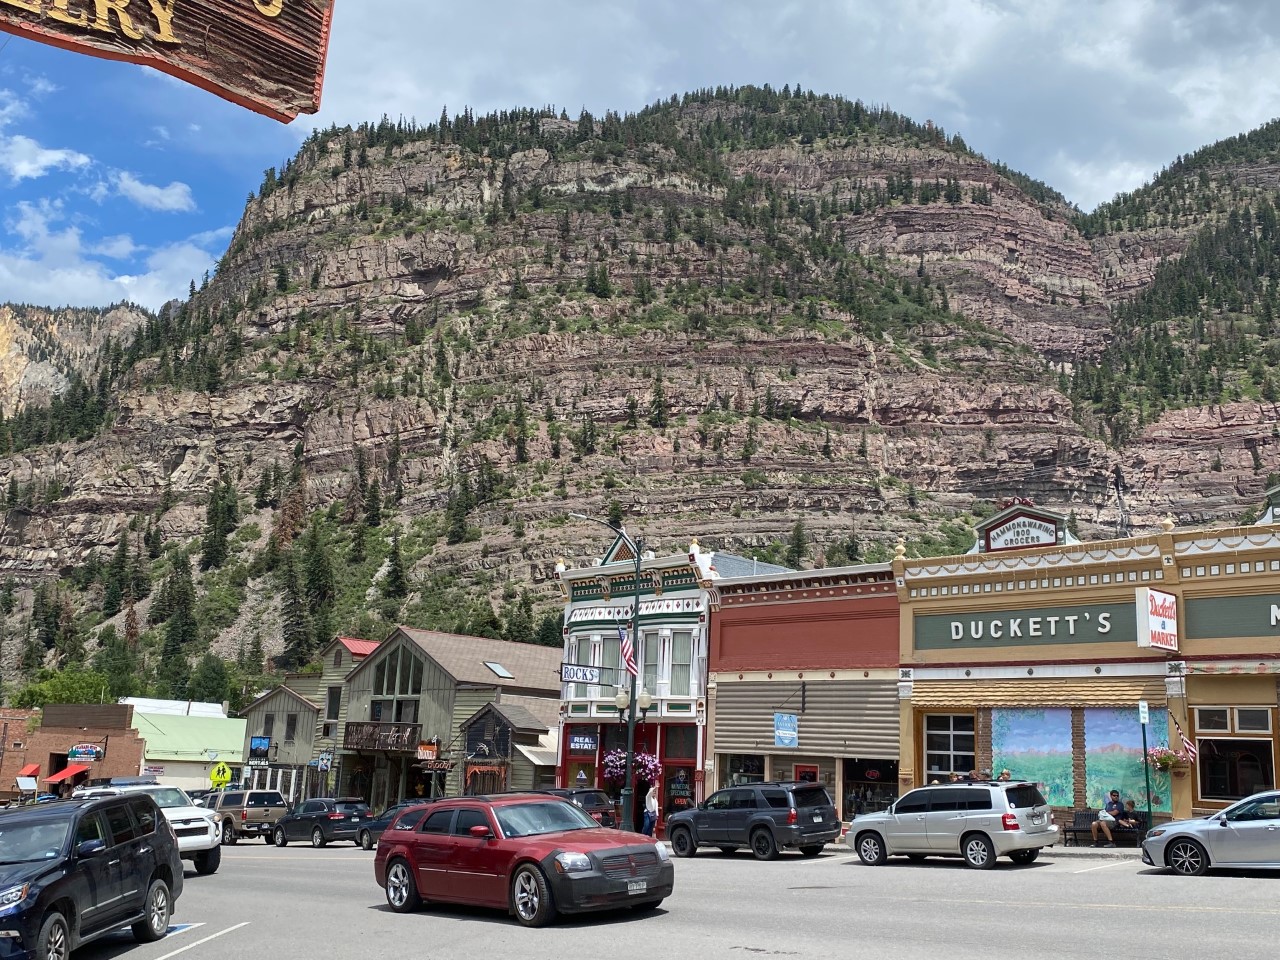 Downtown Ouray, Colorado -good restaurants, shops and sights.